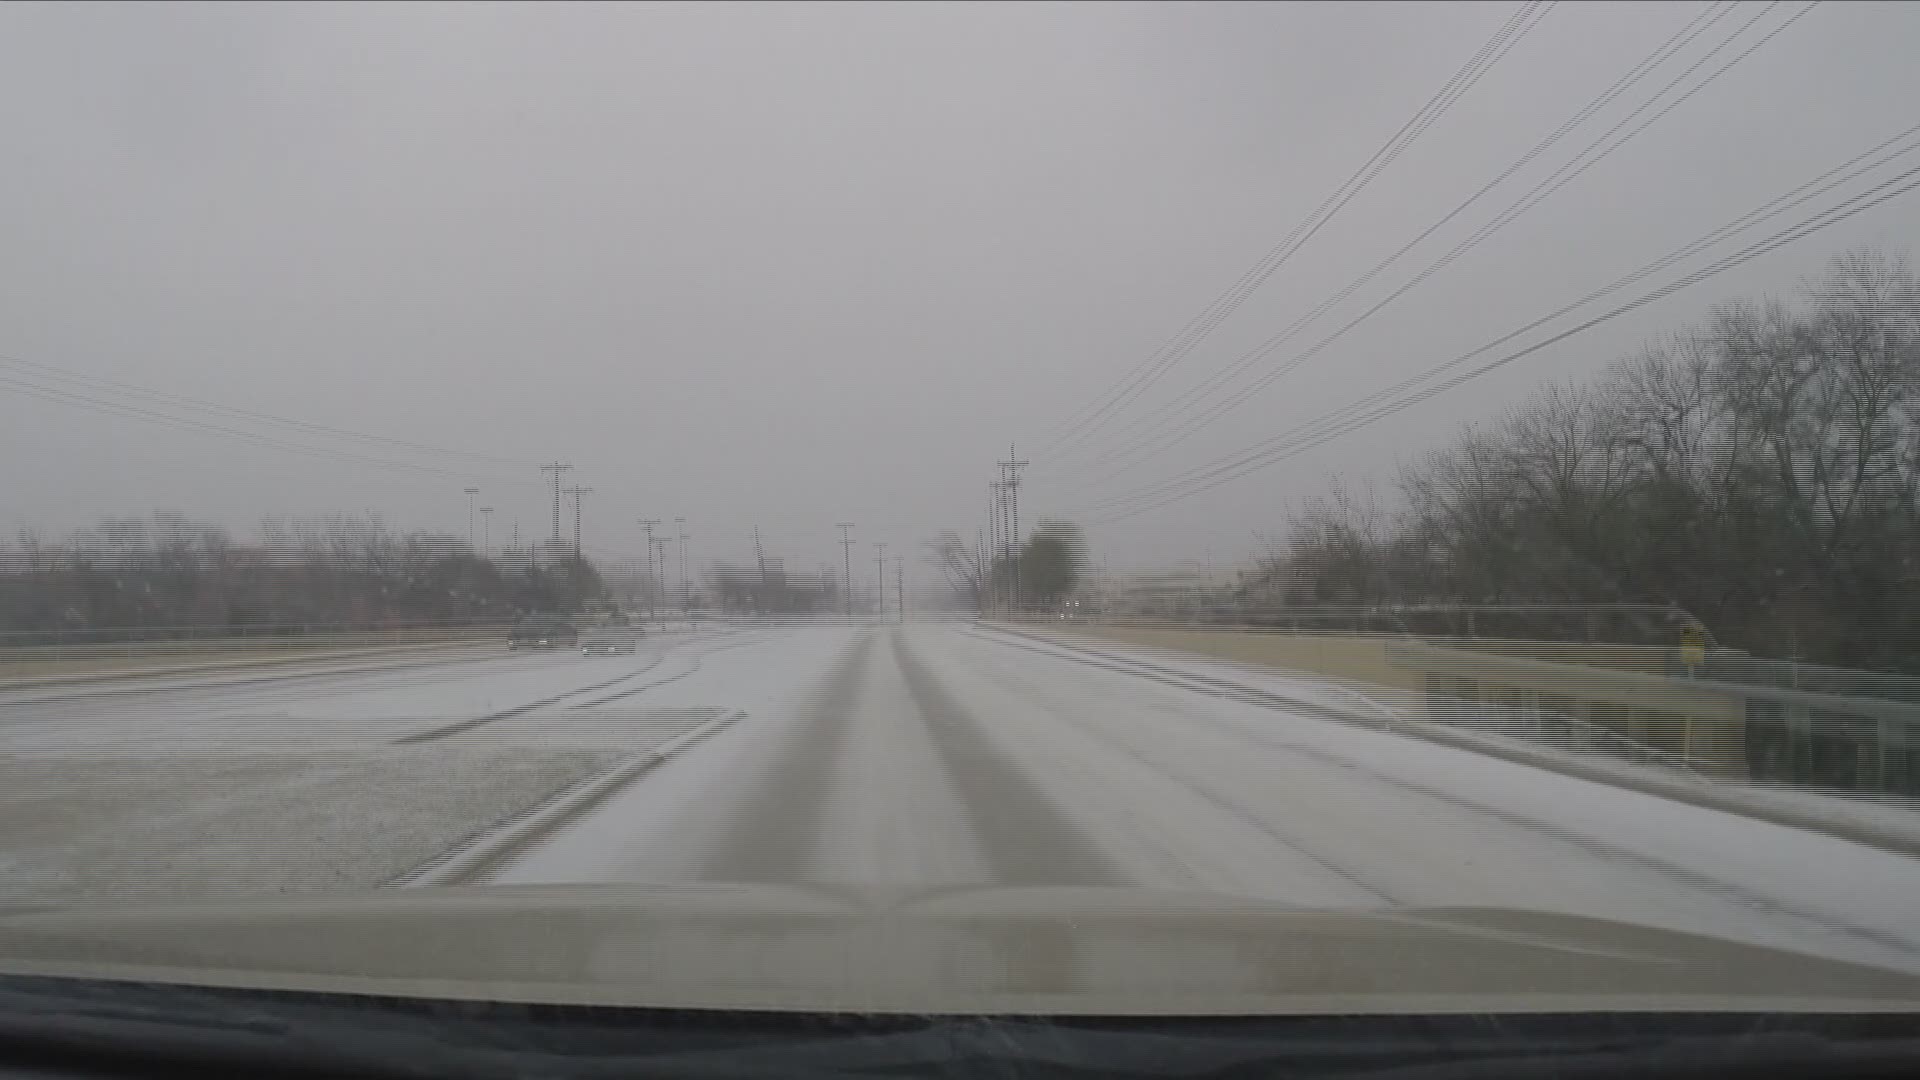 Many in North Texas were hunkered down as winter weather descended. Here's a look at what the roads were like on a snowy Valentine's Day.